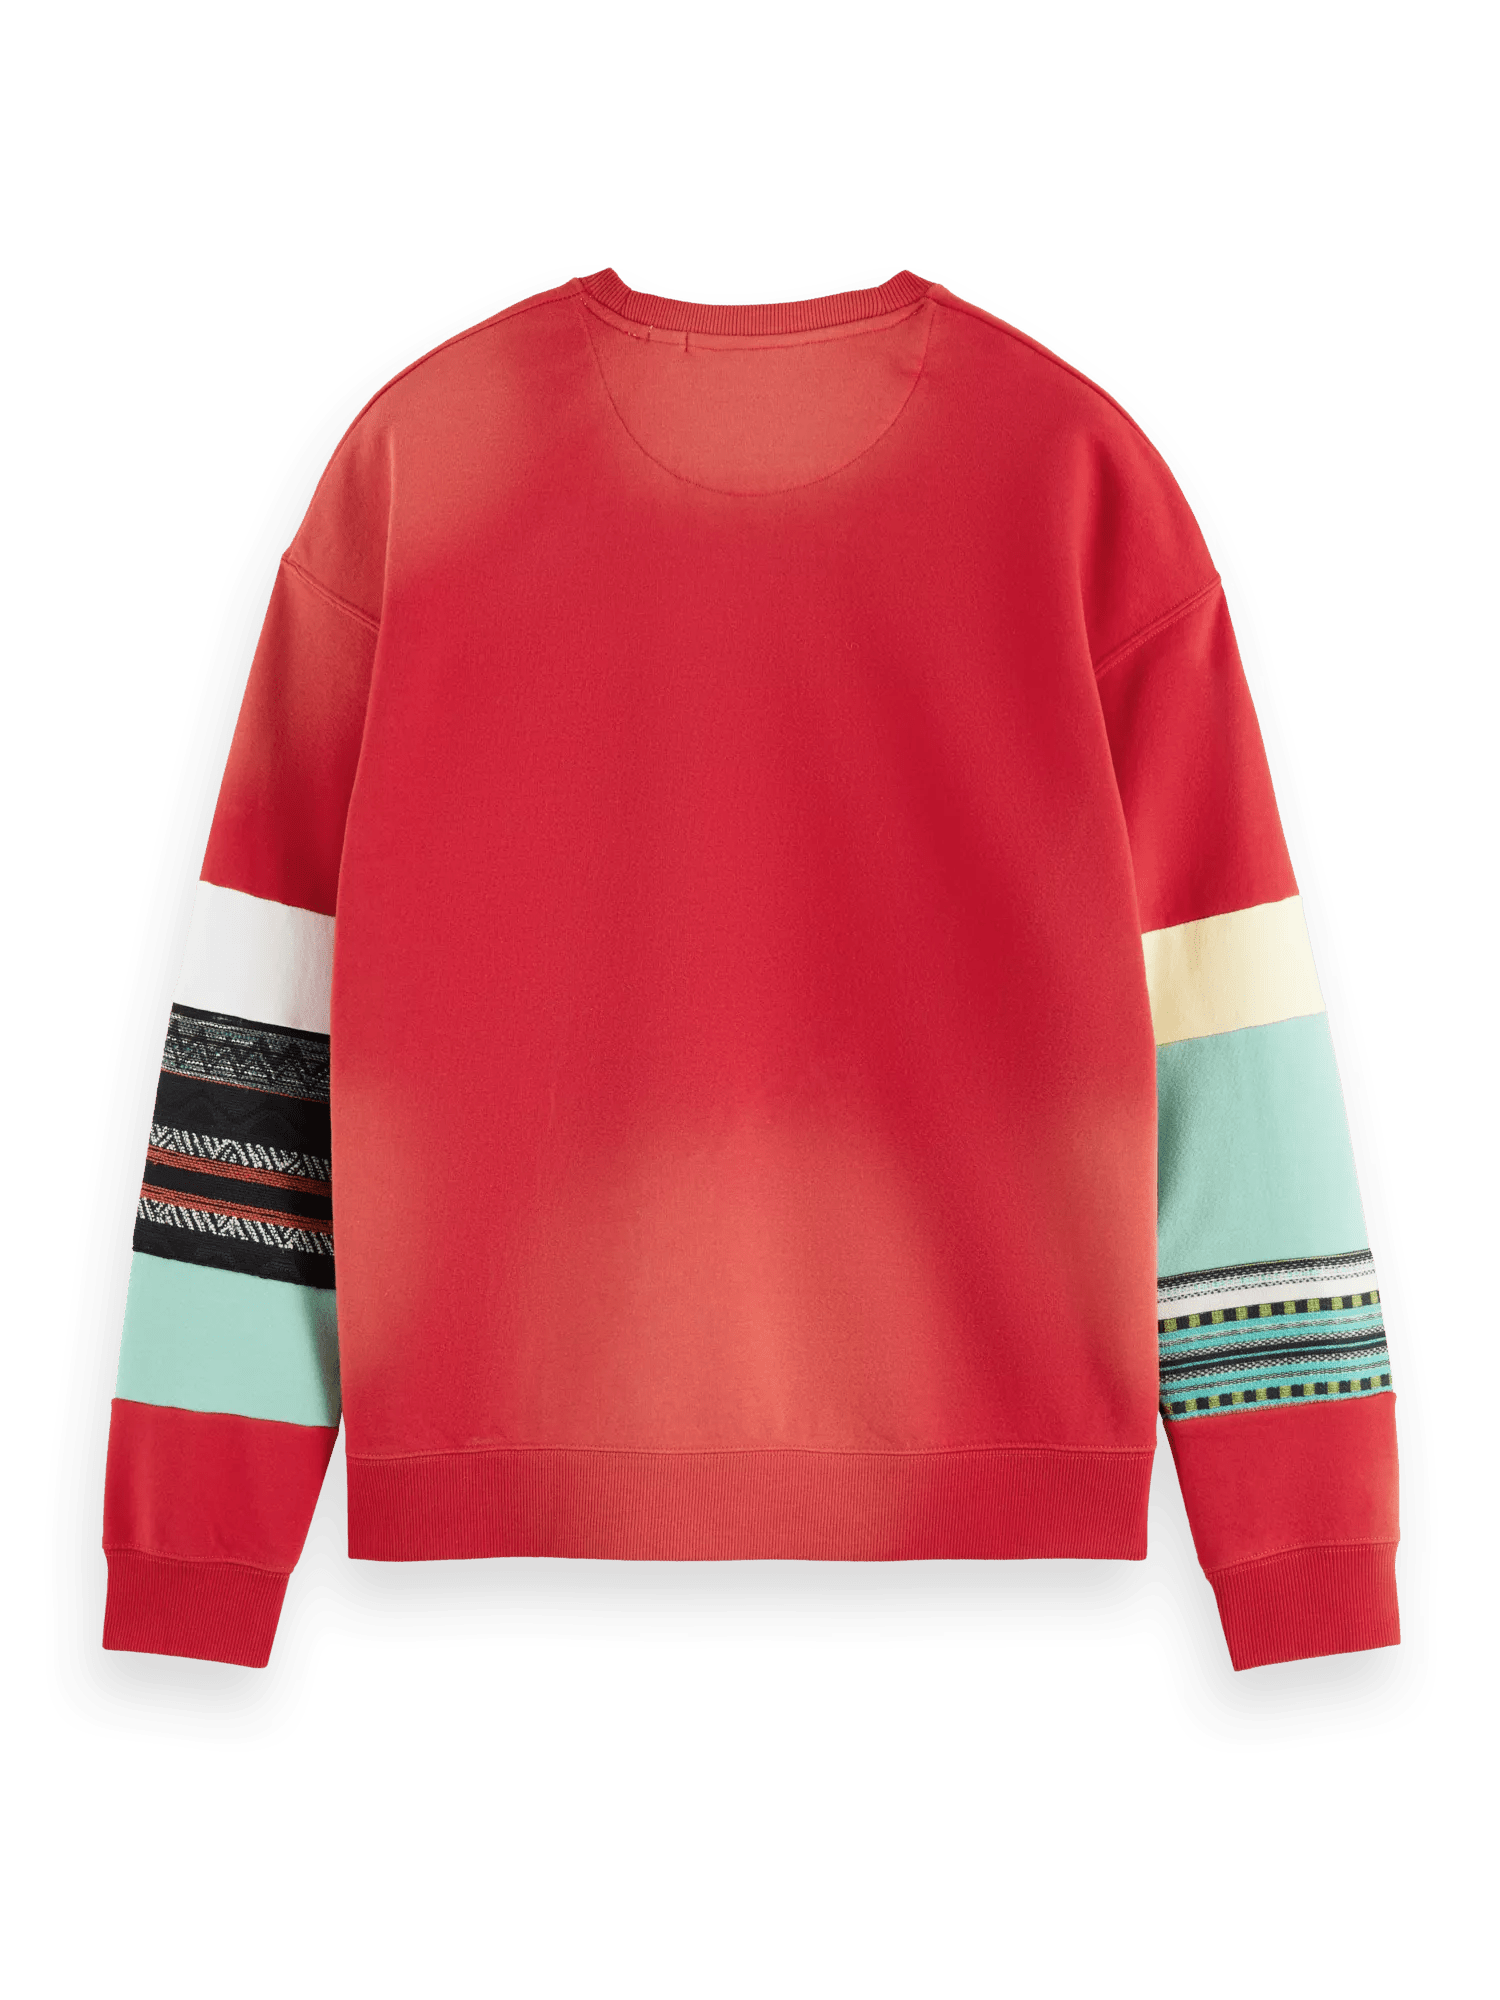 Scotch & Soda Relaxed fit embroidered sweatshirt BCK